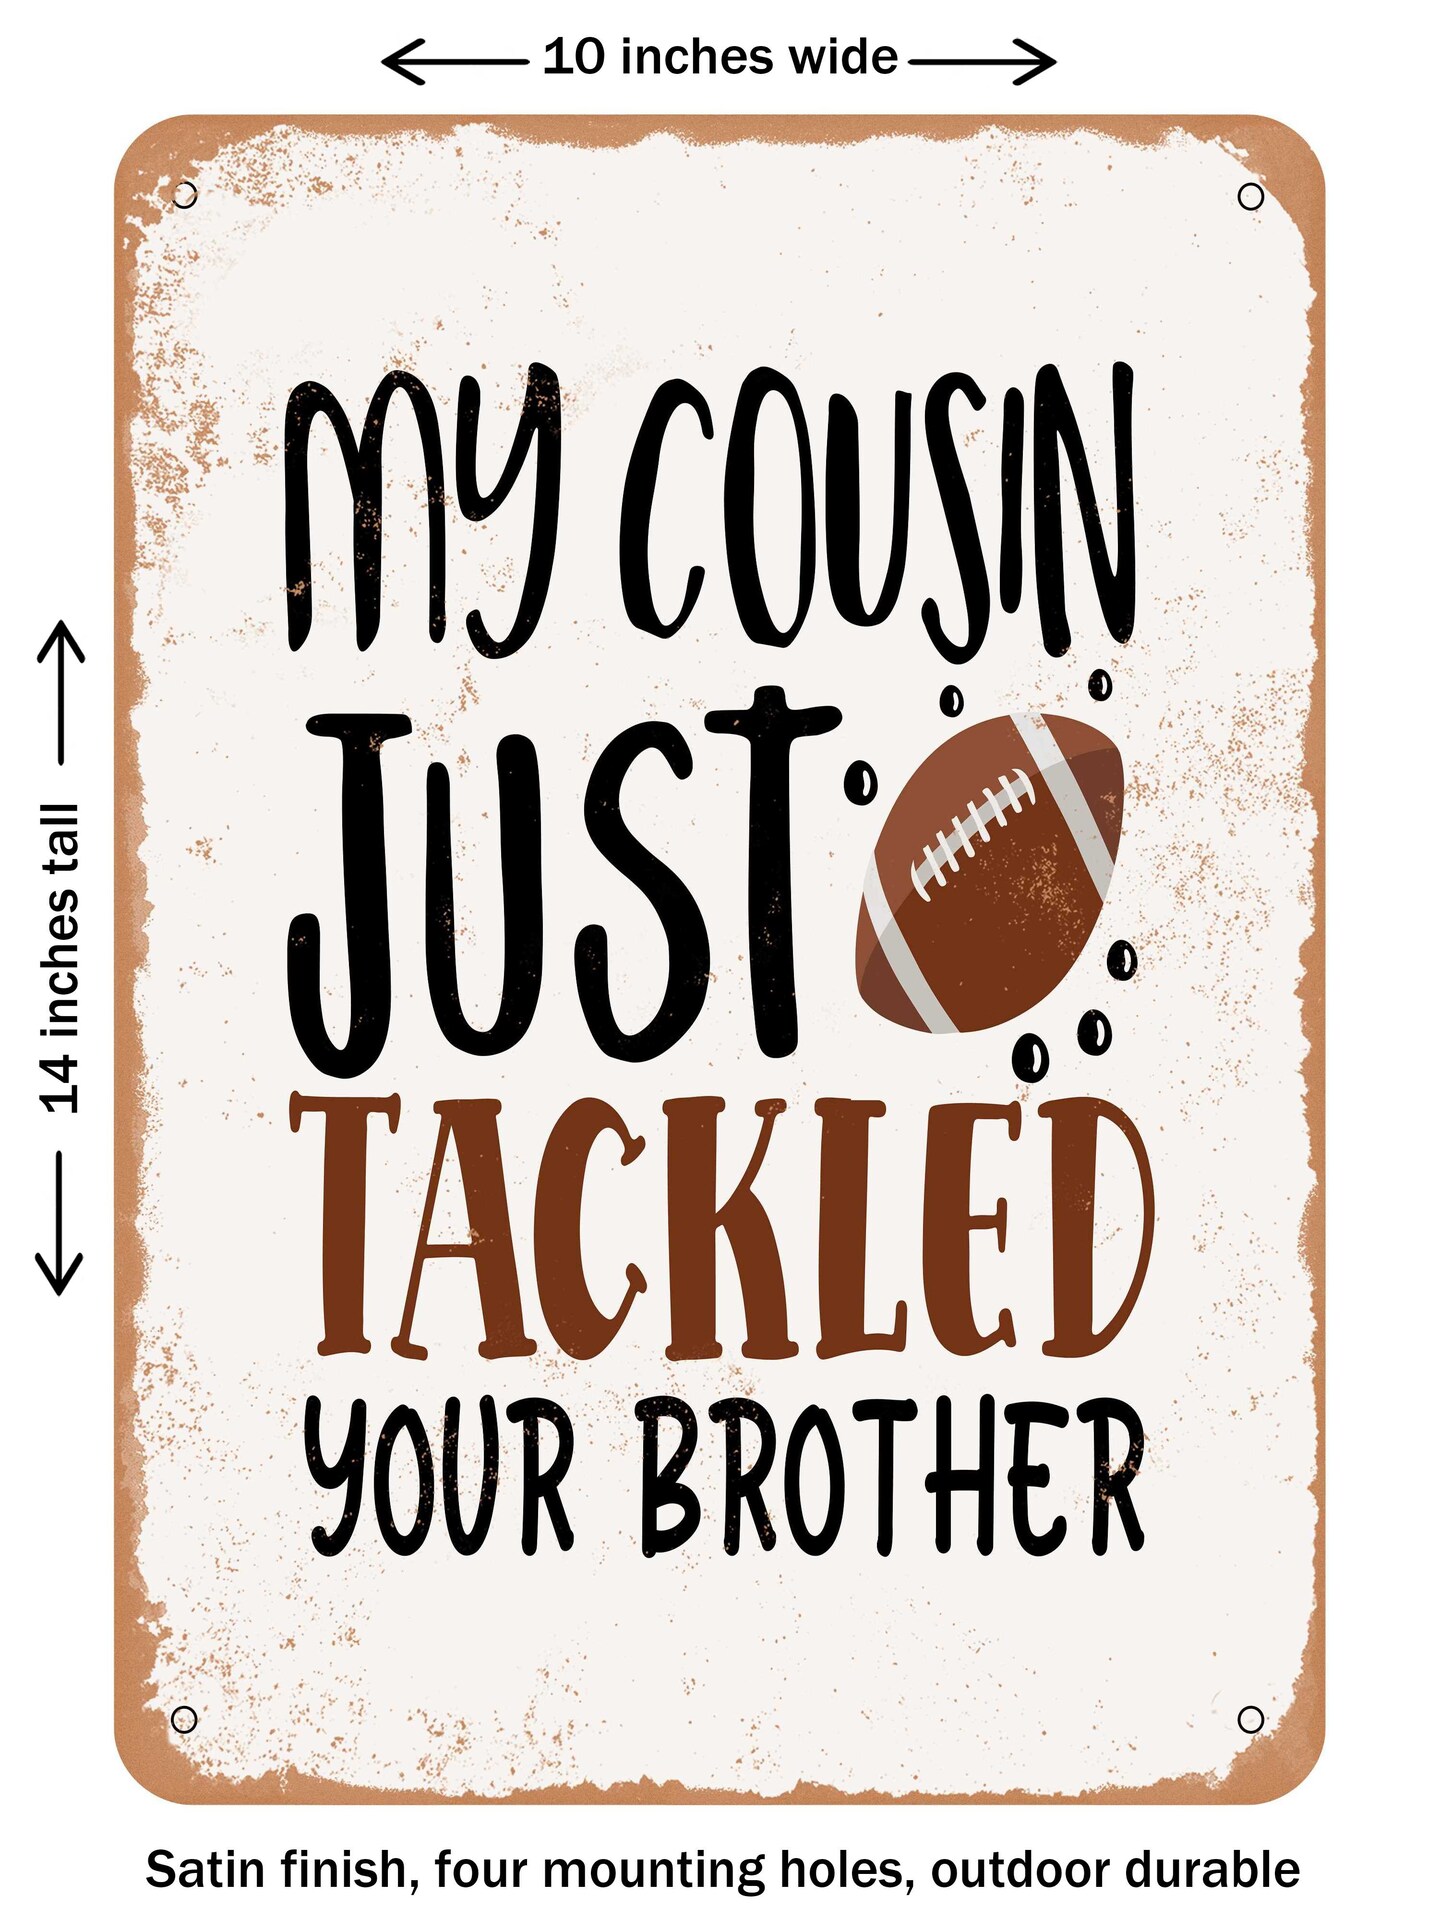 DECORATIVE METAL SIGN - My Cousin Just Tackled Your Brother  - Vintage Rusty Look